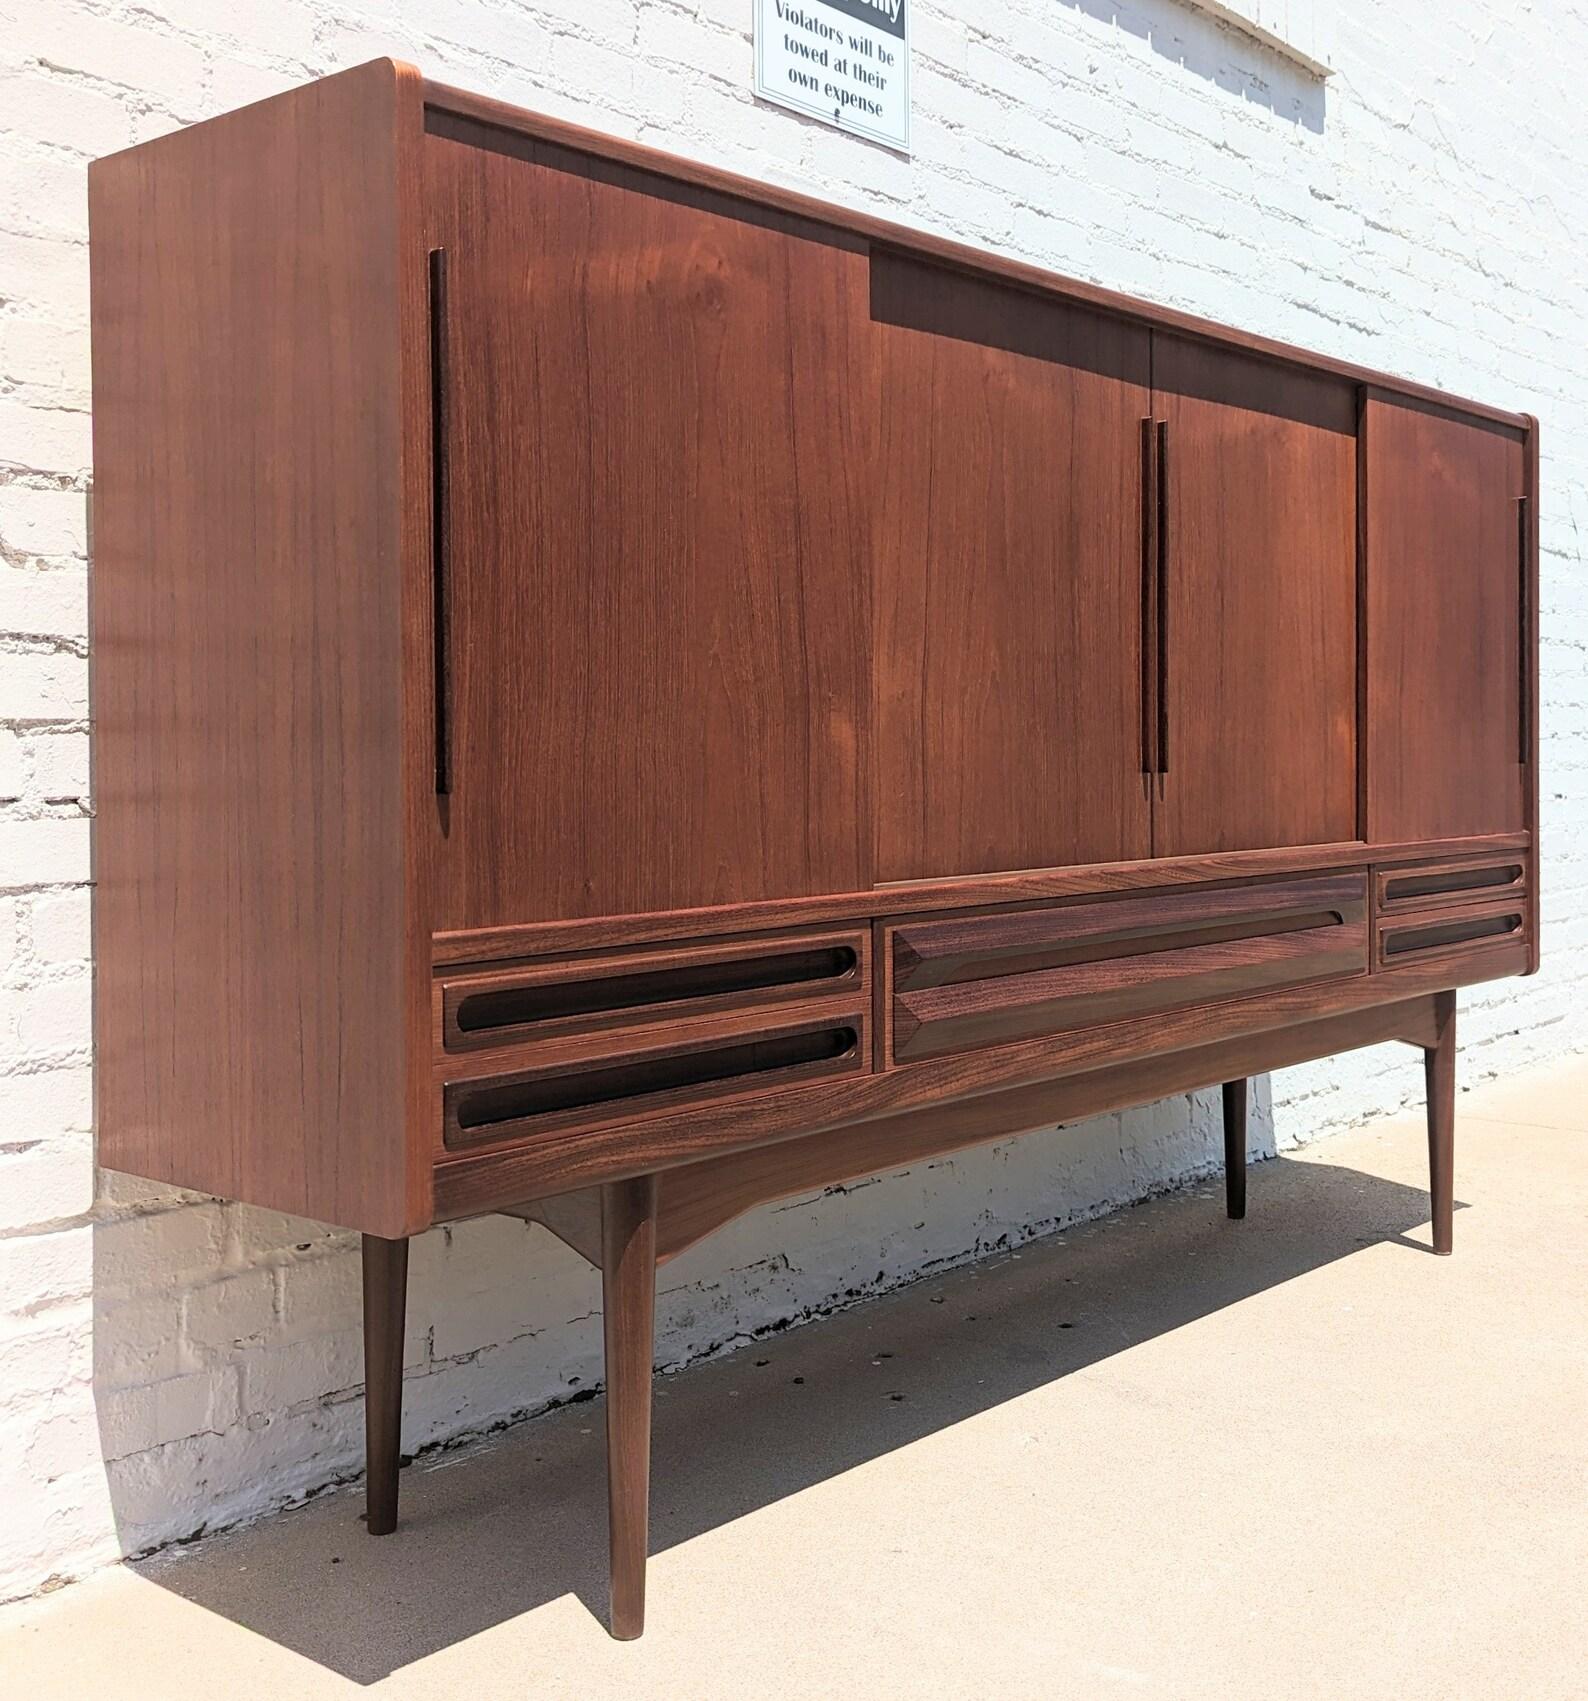 Mid Century Danish Modern Teak Cocktail Cabinet

Above average vintage condition and structurally sound. Has some expected slight finish wear and scratching. Has a couple small edge dings. Very beautiful well made piece. Outdoor listing pictures